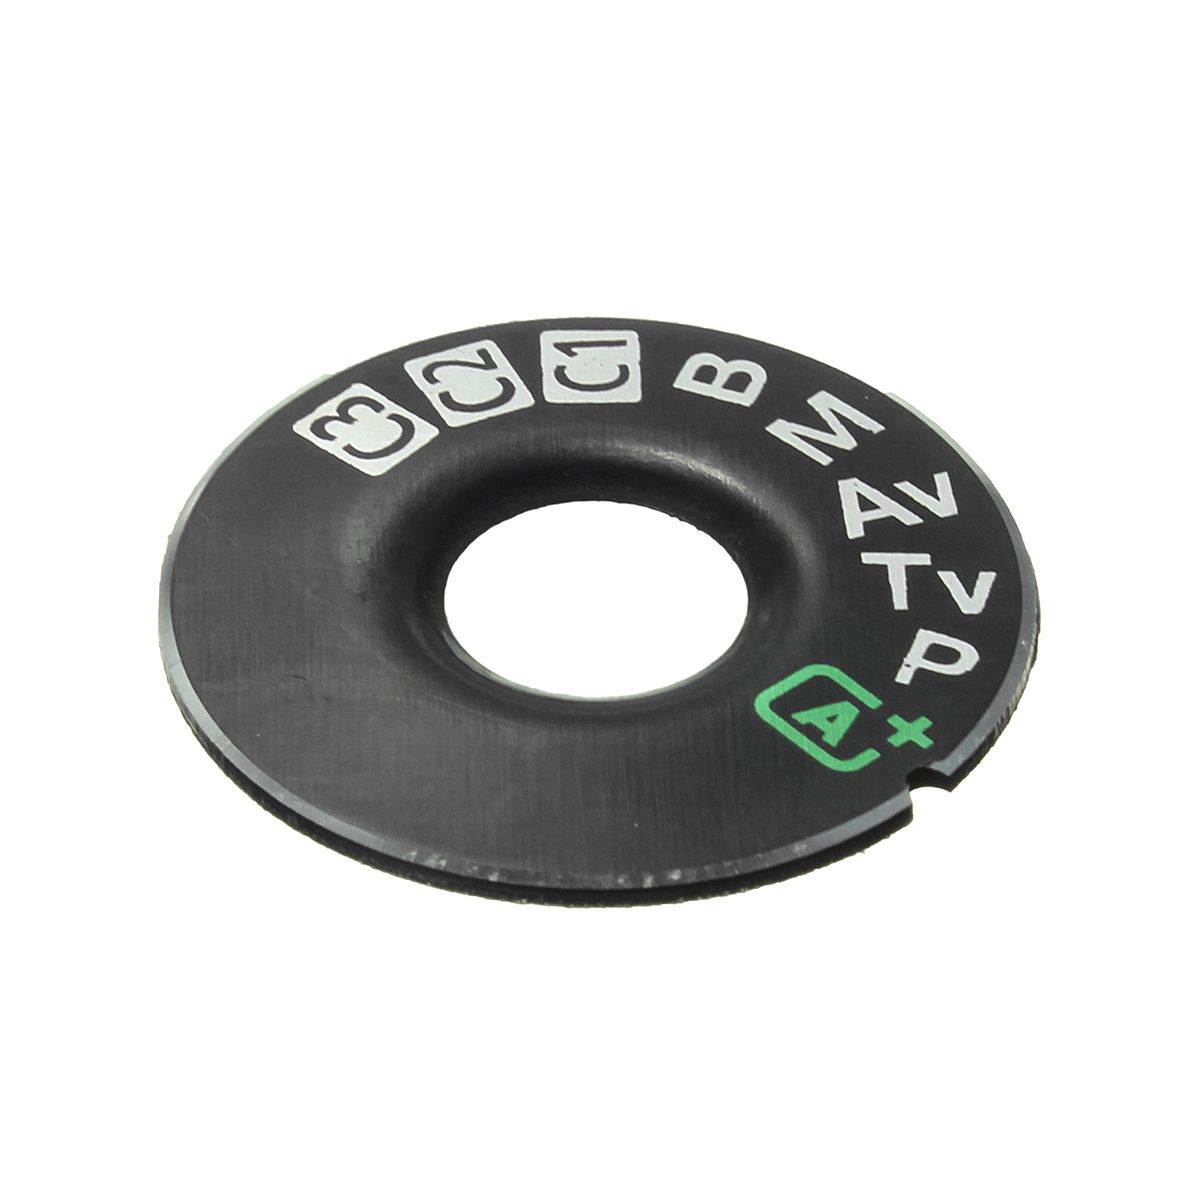 Replacement-Dial-Mode-Interface-Cap-For-Canon-EOS-5D-Mark-III-5D3-Part-1159743